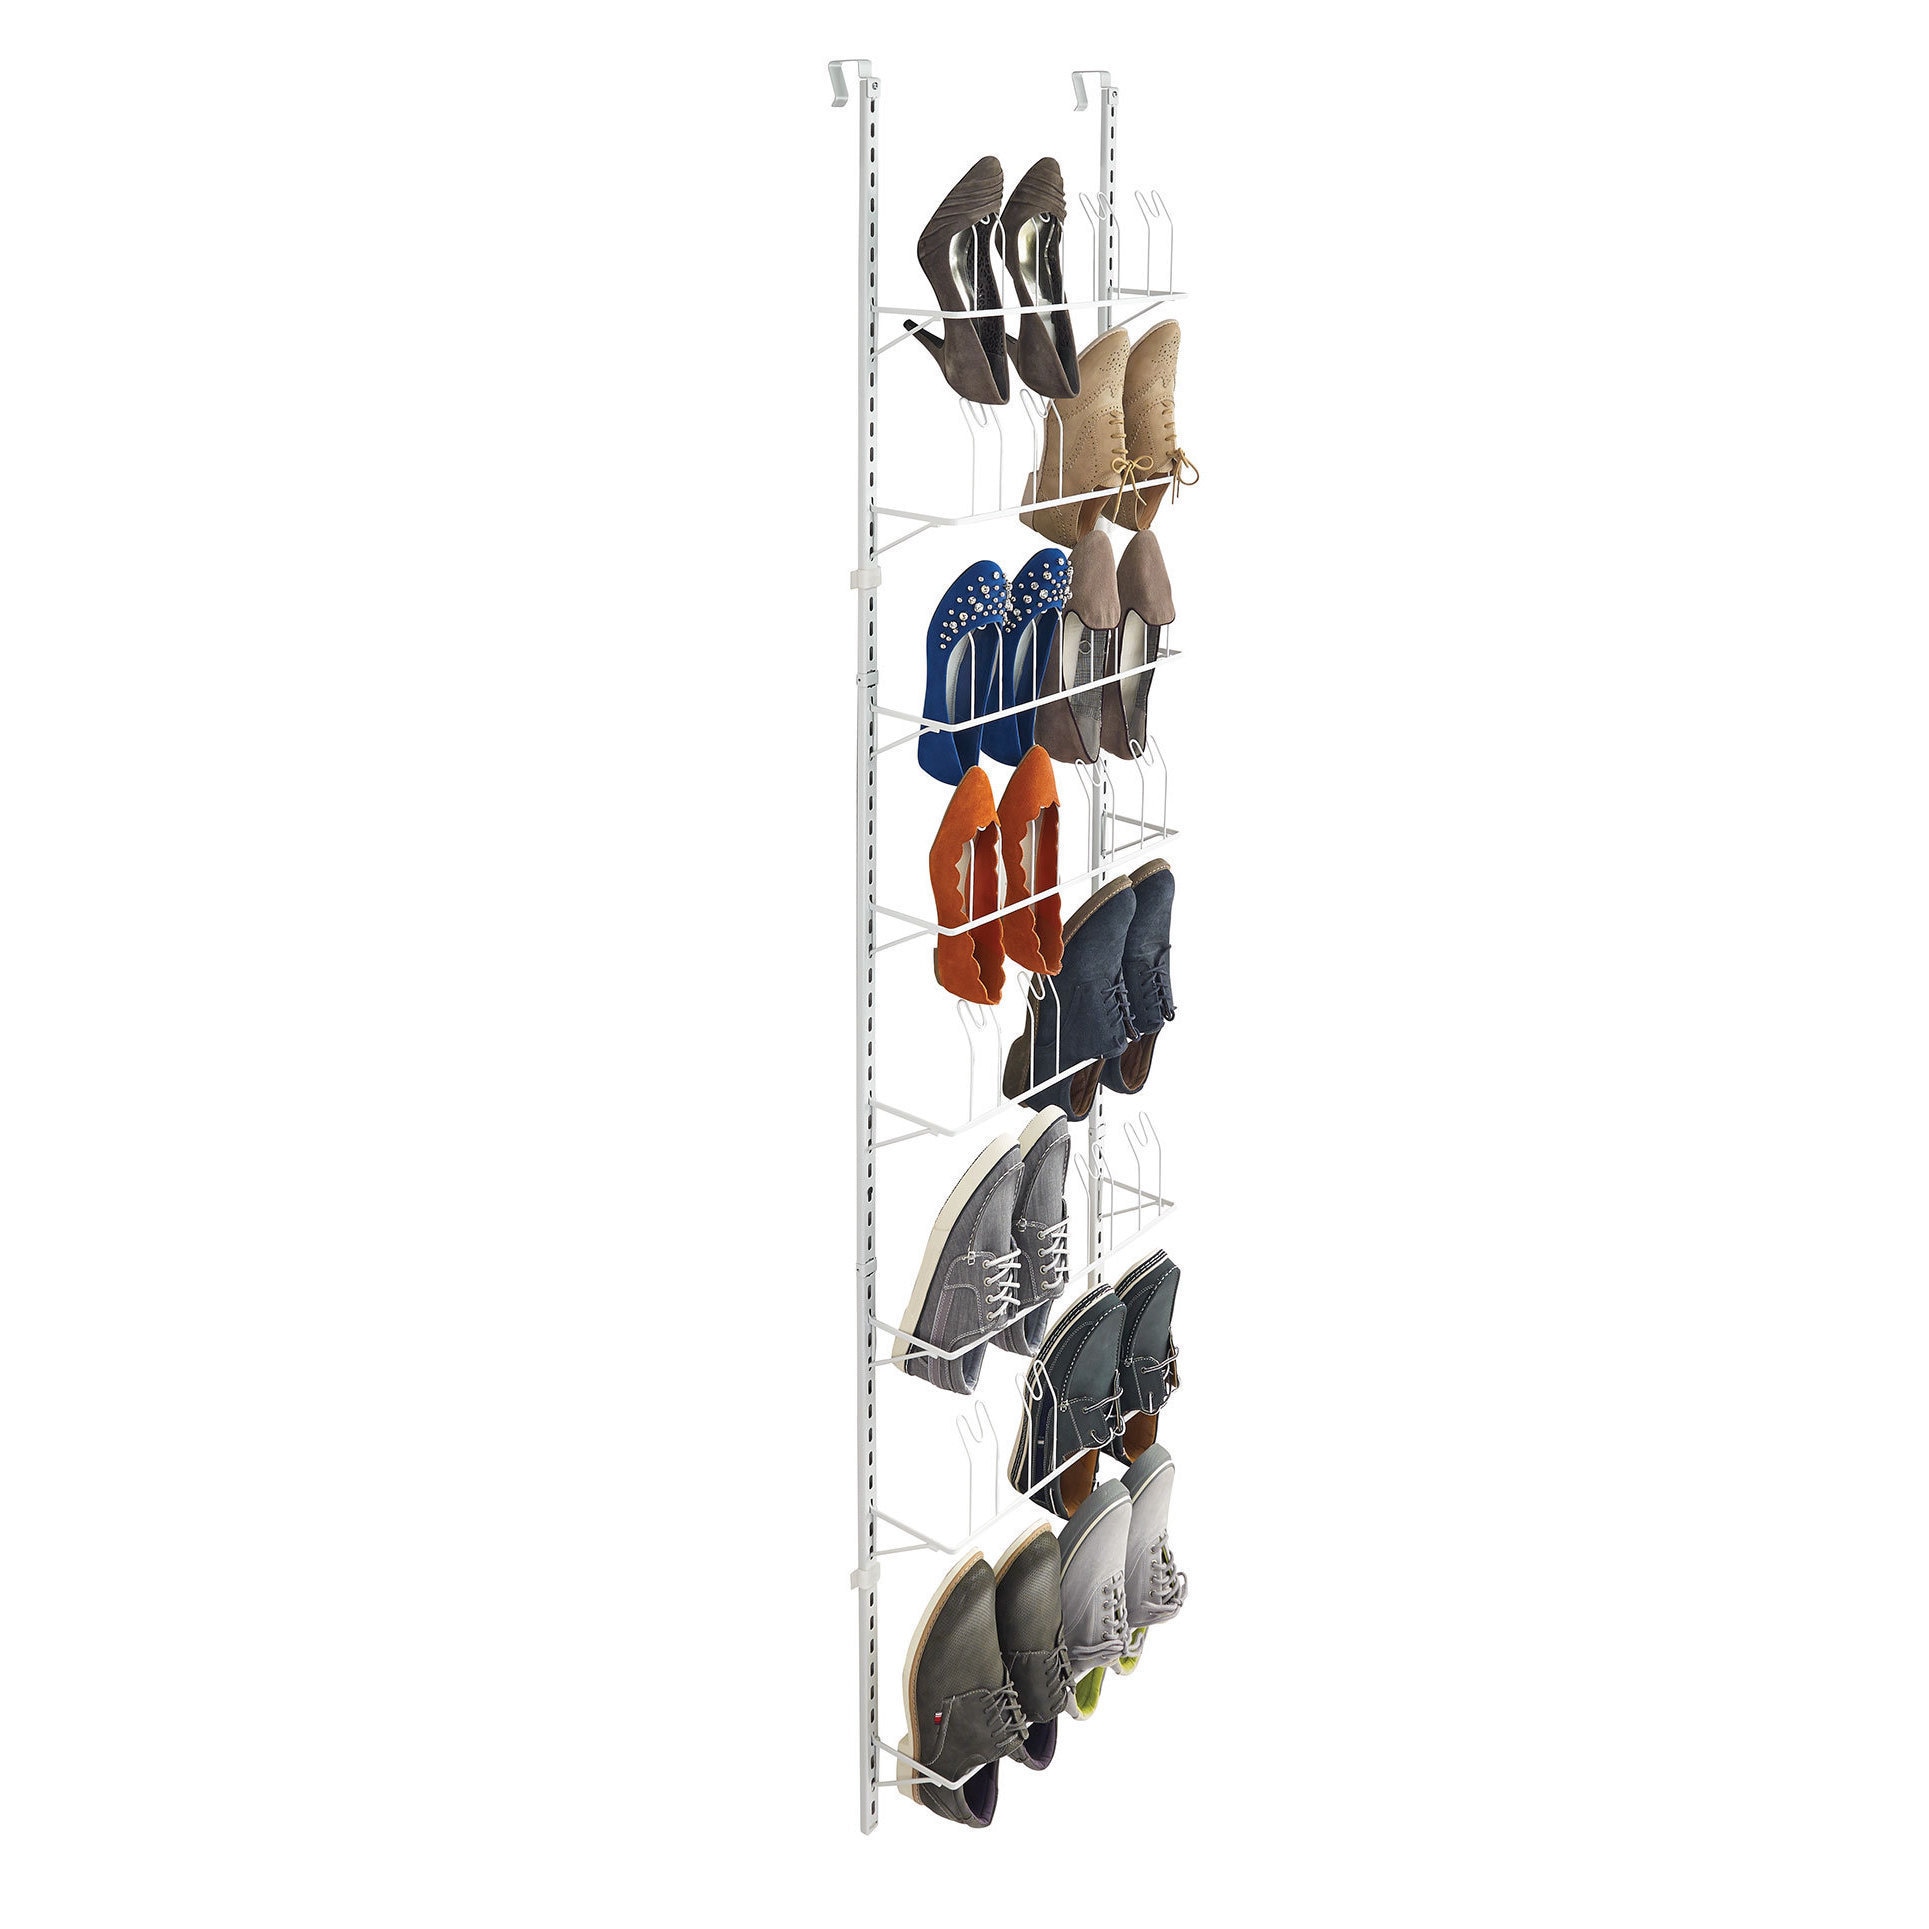 https://ak1.ostkcdn.com/images/products/11591328/Adjustable-Hanging-Shoe-Organizer-d68c3156-1e97-4f6e-9024-adf9e5d0f459.jpg